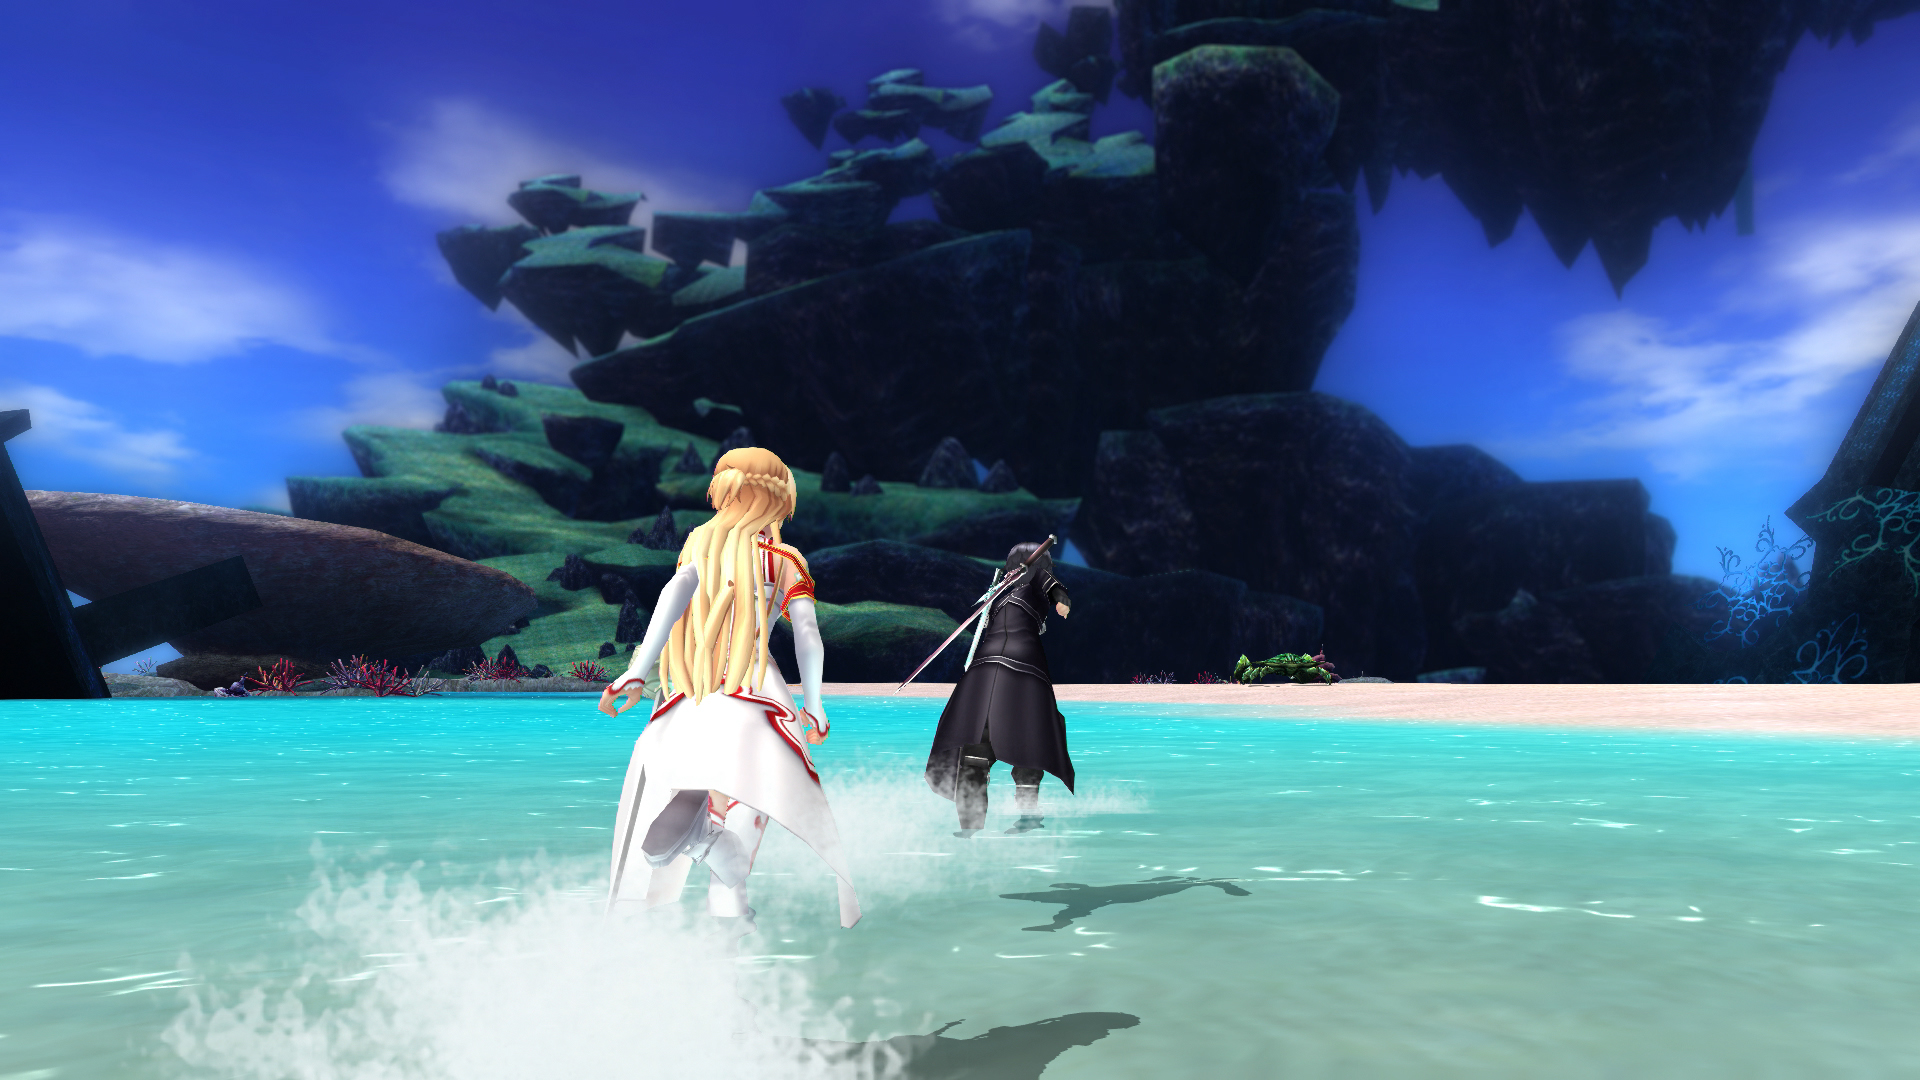 Check Out E3 2015 Trailers for Sword Art Online Re: Hollow Fragment and Lost Song